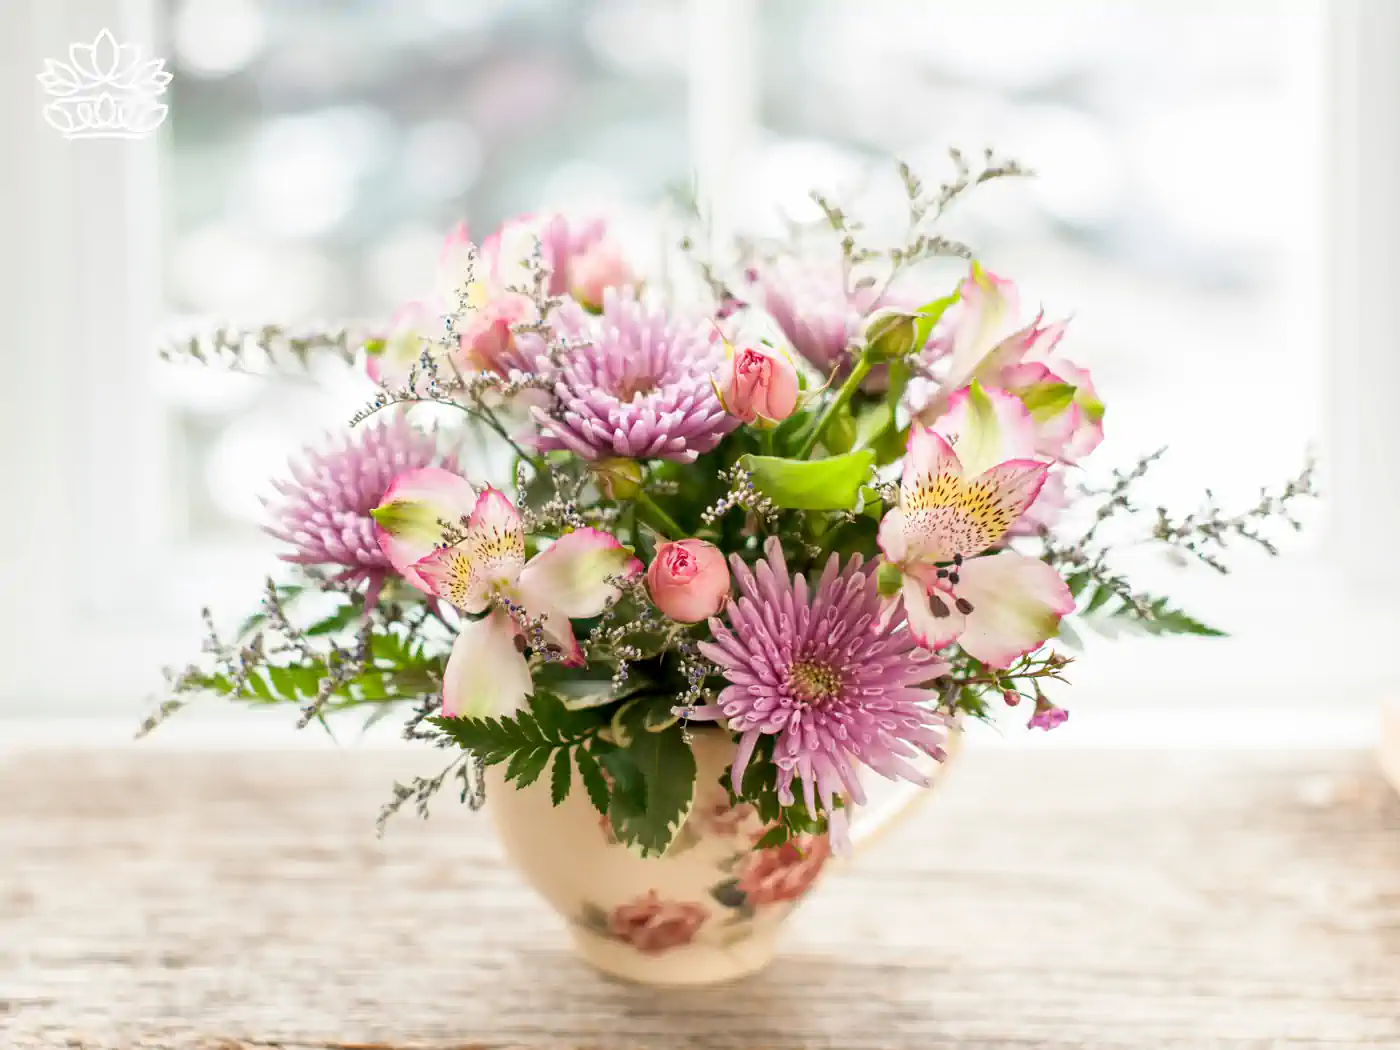 A classic vase filled with an exquisite arrangement of pink asters, alstroemeria, and delicate green foliage, placed by a window with natural light illuminating its beauty. Fabulous Flowers and Gifts: Flower Arrangements Under R500, Delivered with Heart.